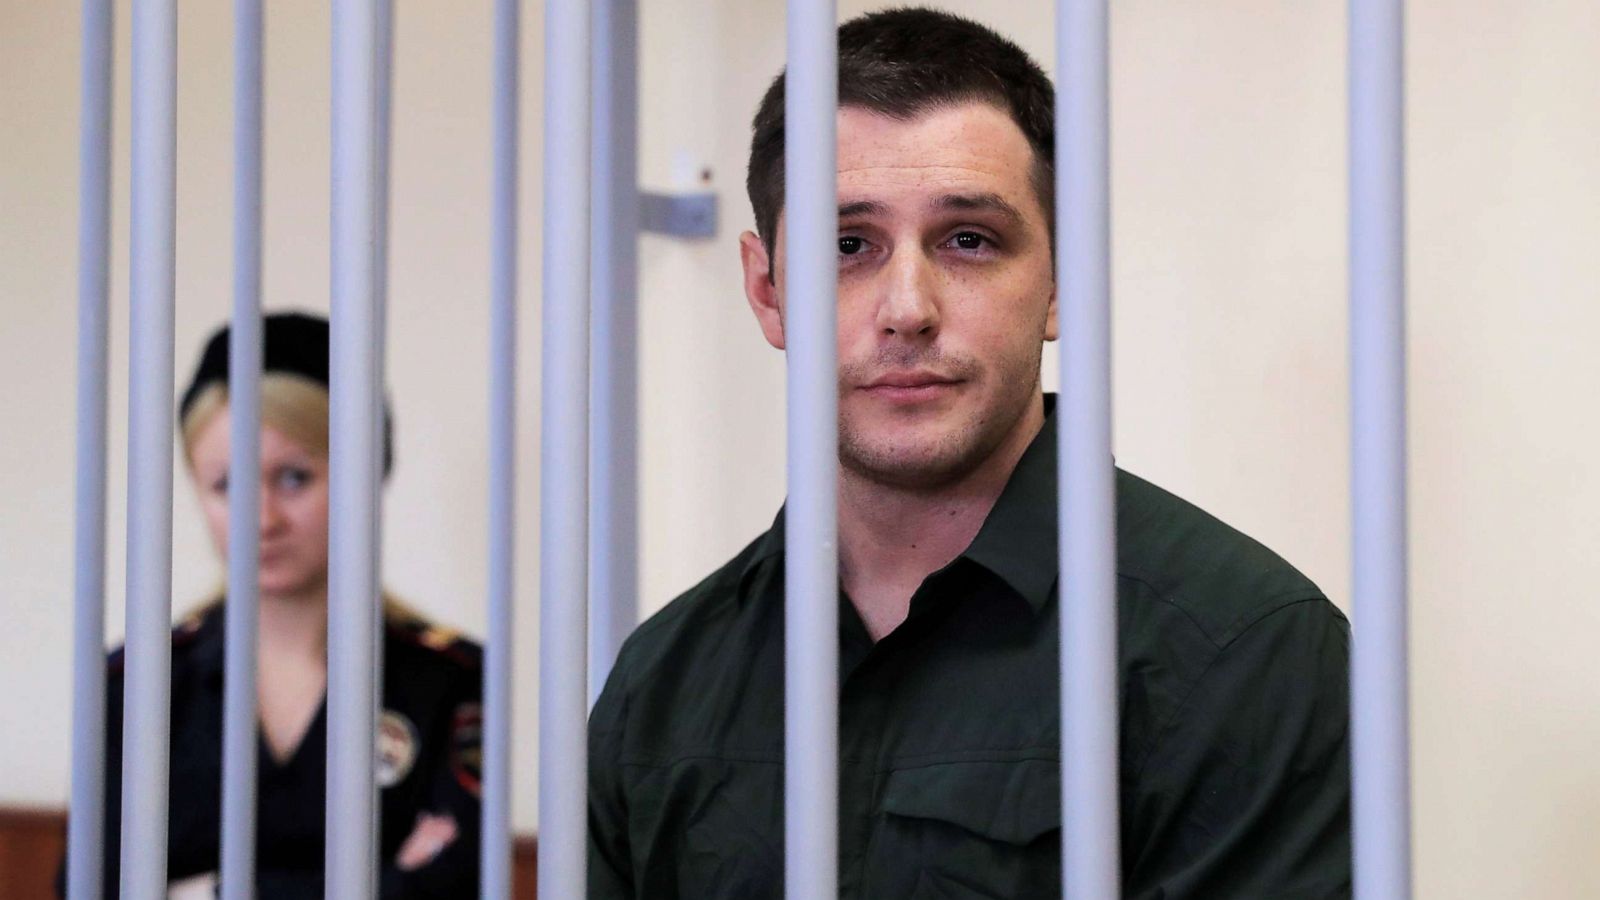 2Nd Former Us Marine Held In Russia For Months On Charges His Family Says  Are False - Abc News